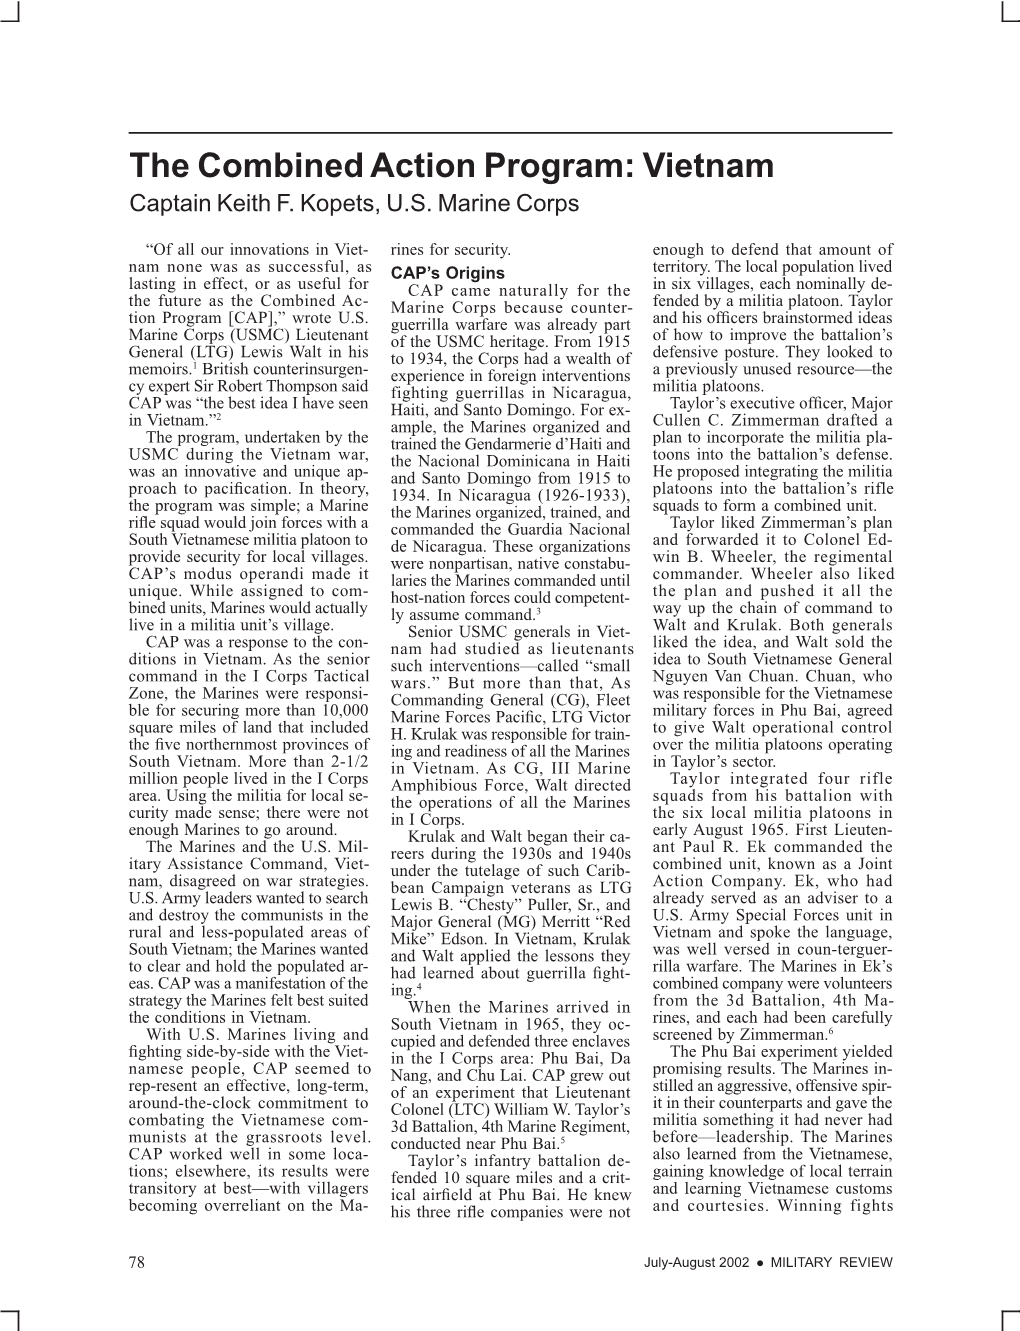 The Combined Action Program: Vietnam Captain Keith F